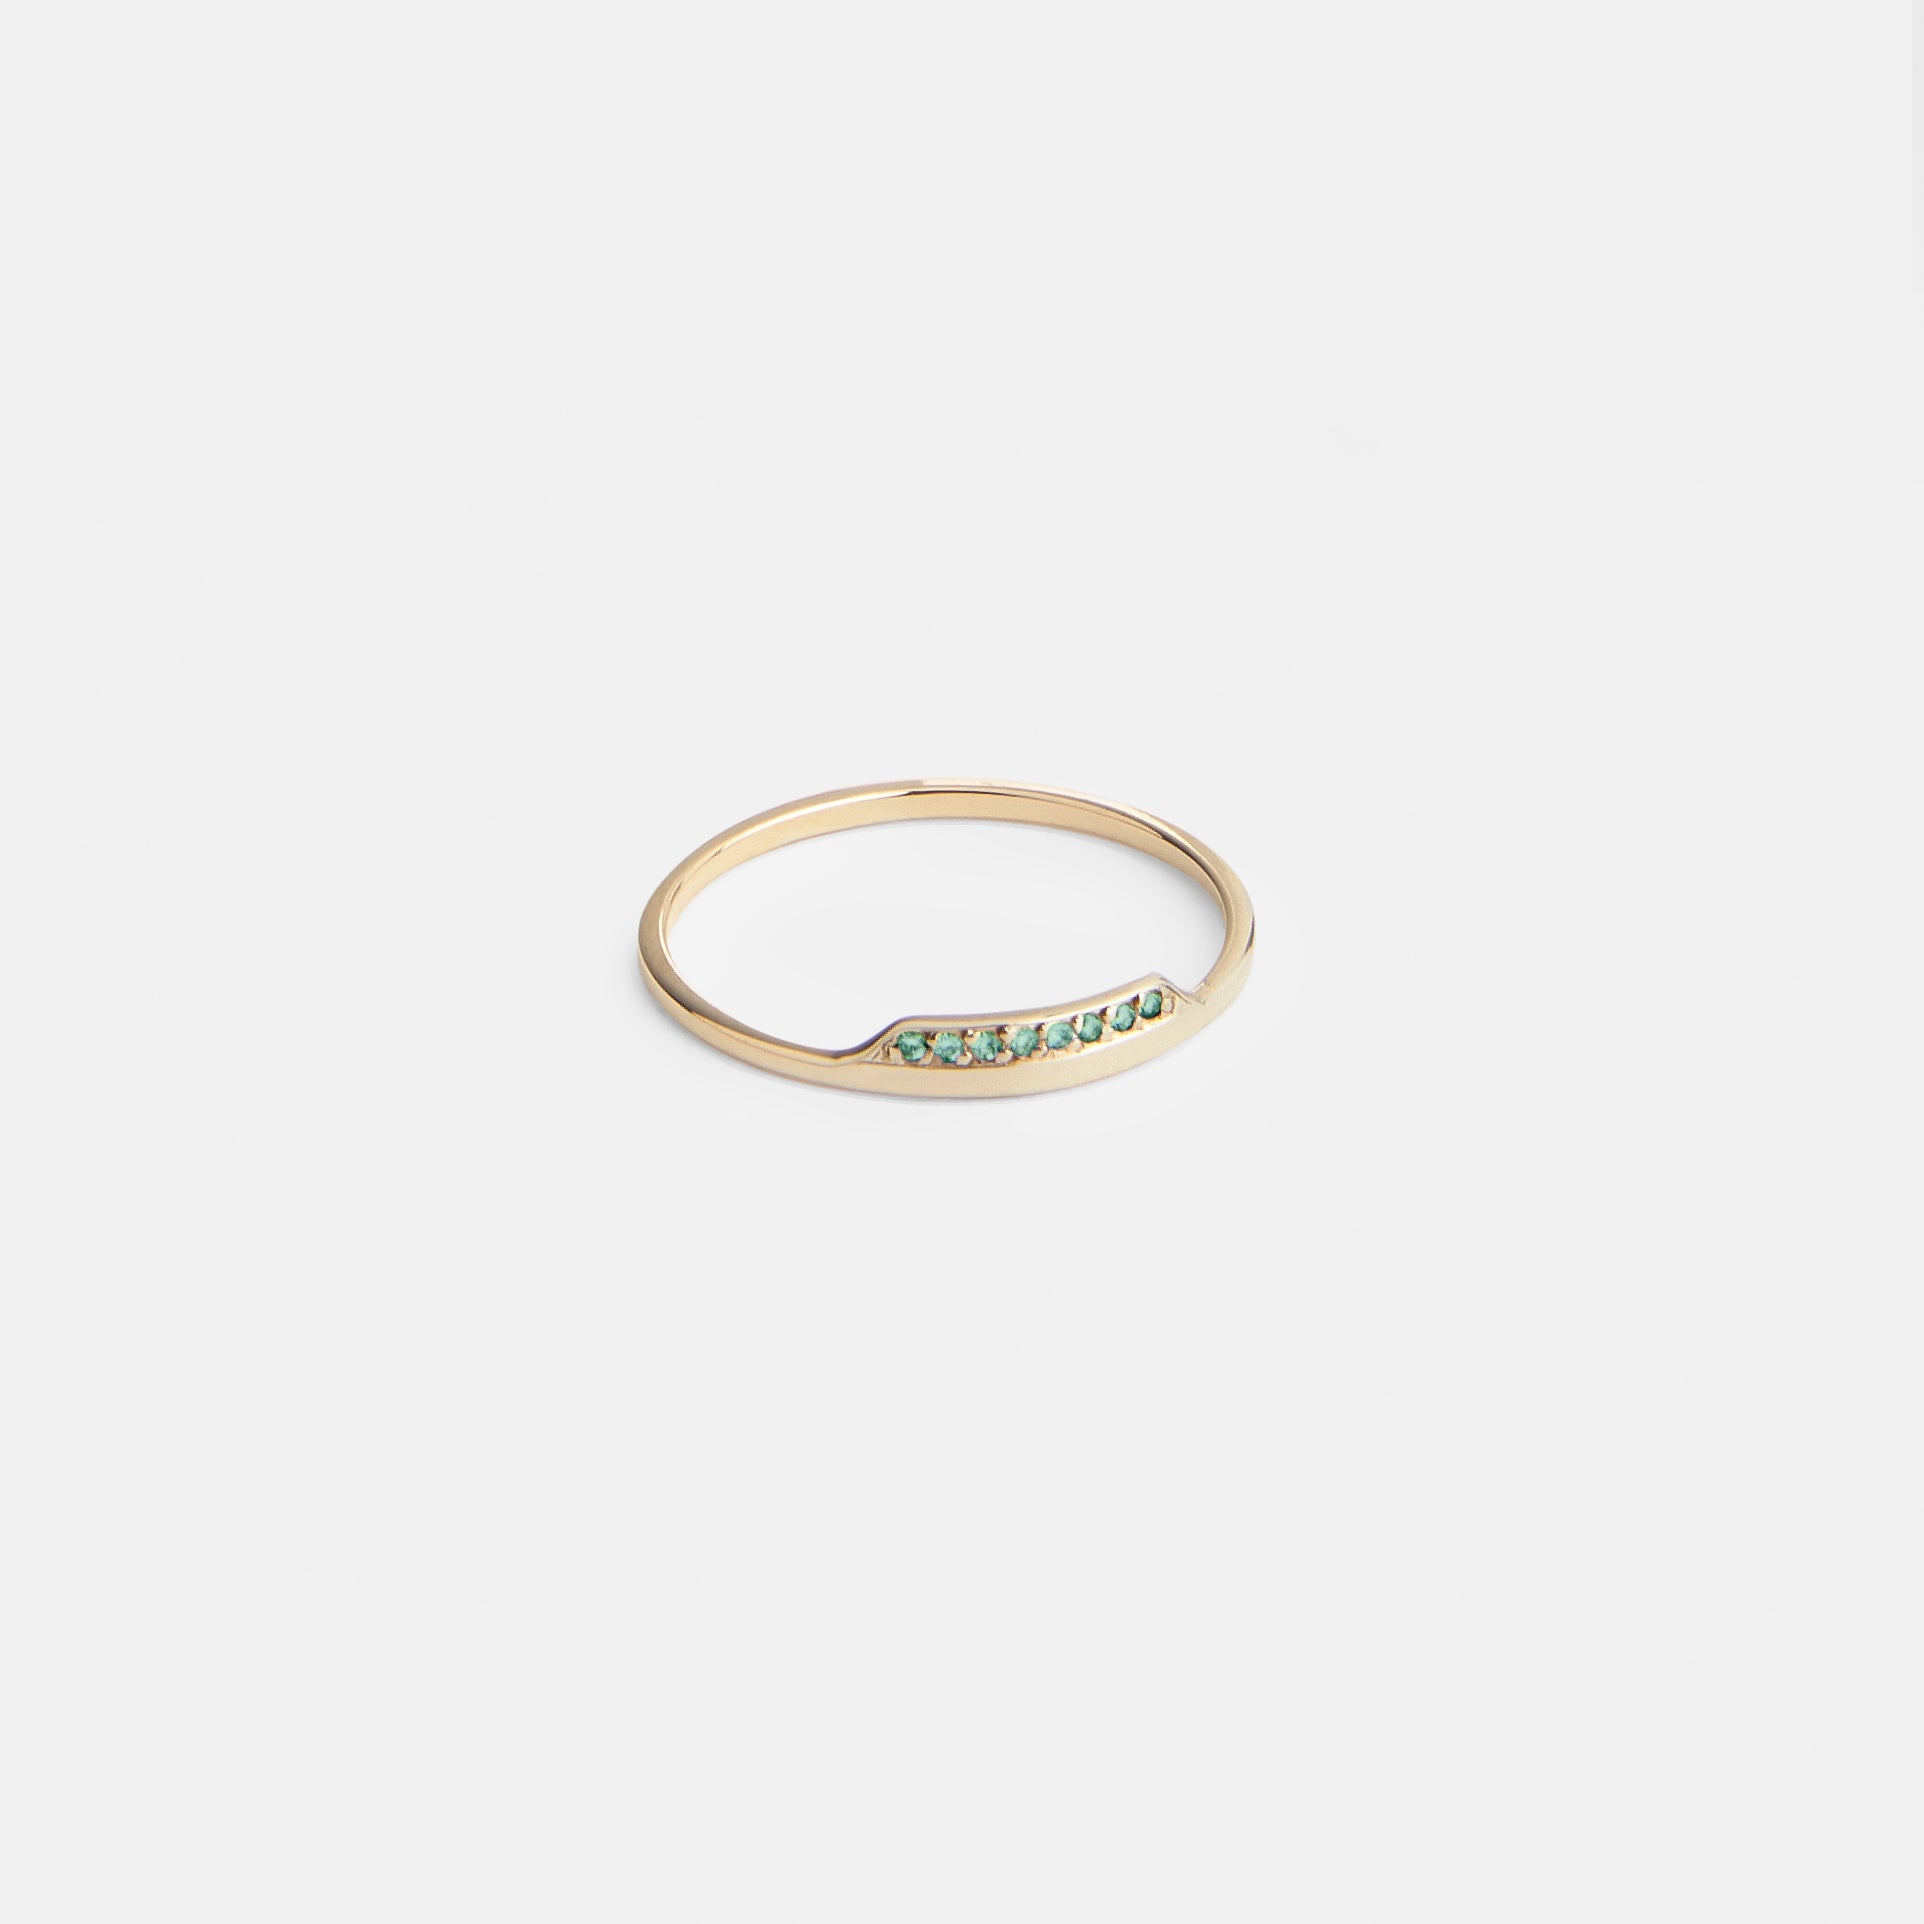 Salo Designer Ring in 14k Gold set with Emeralds By SHW Fine Jewelry NYC